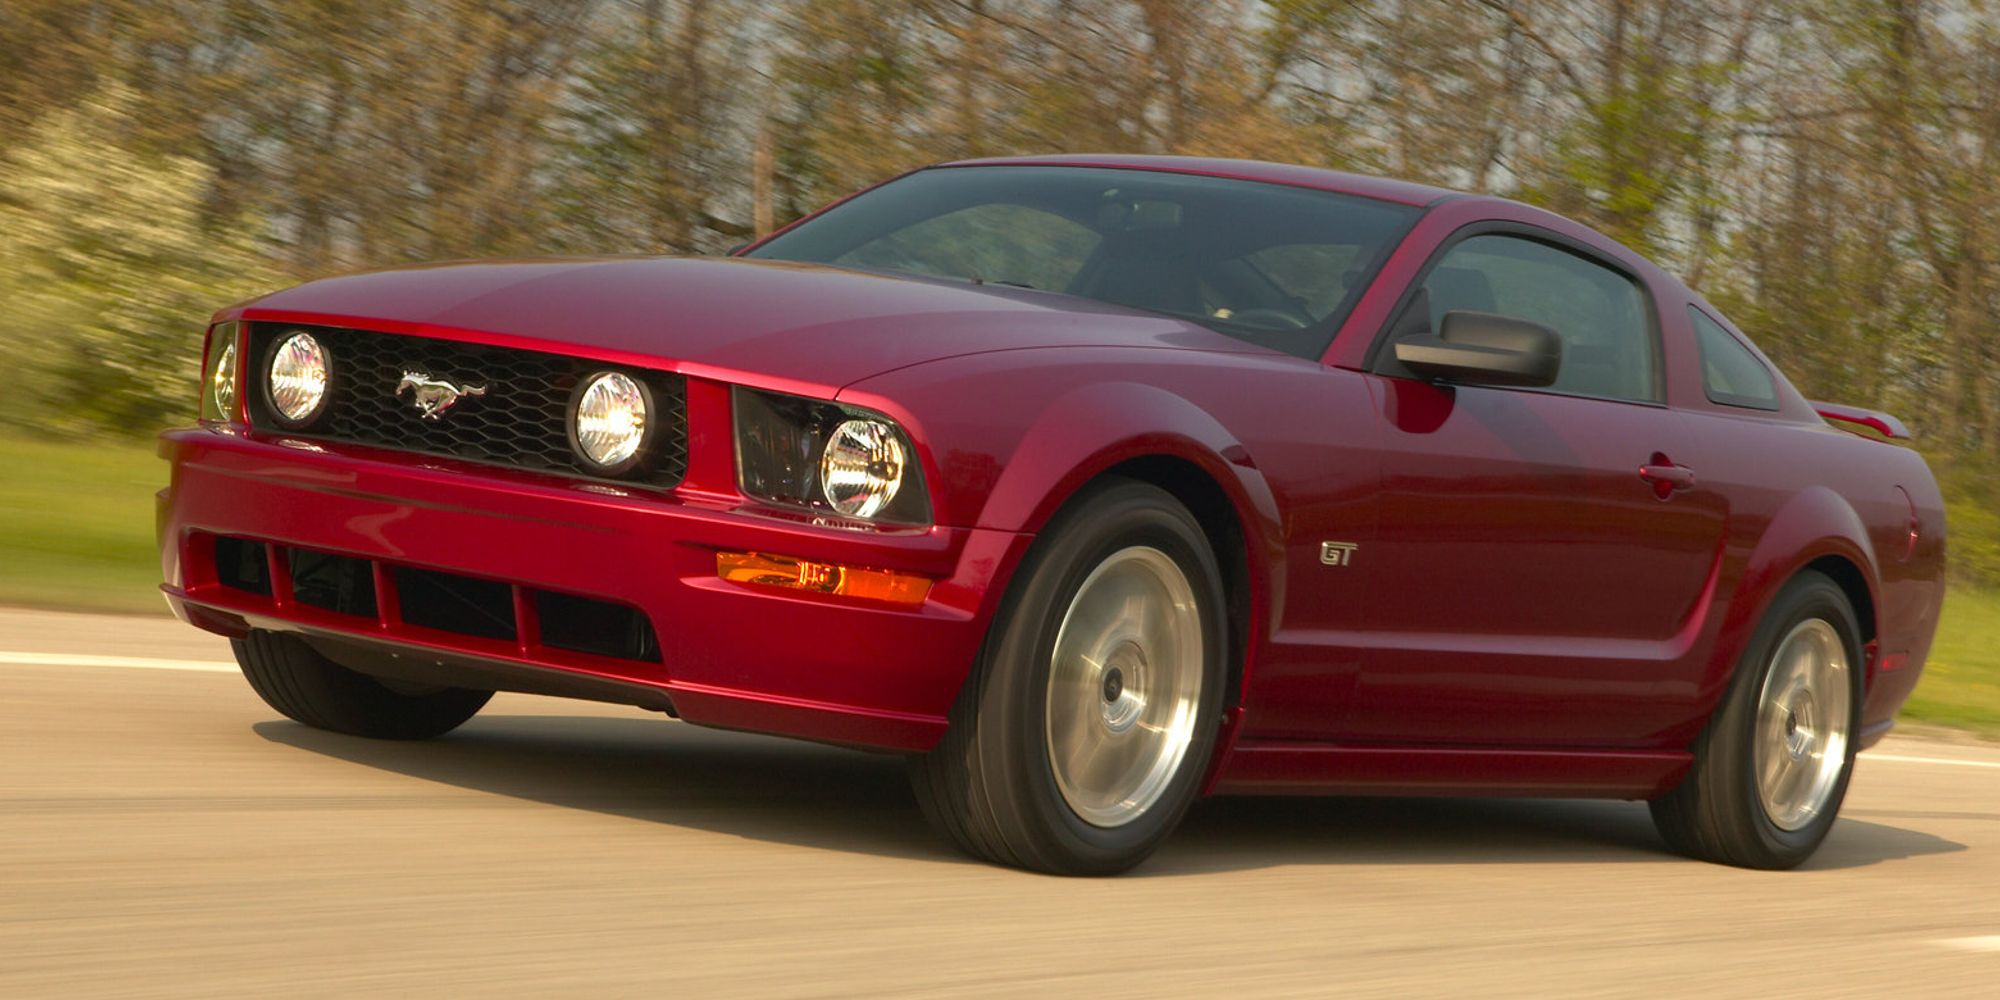 Front 3/4 view of a red S197 Mustang on the move